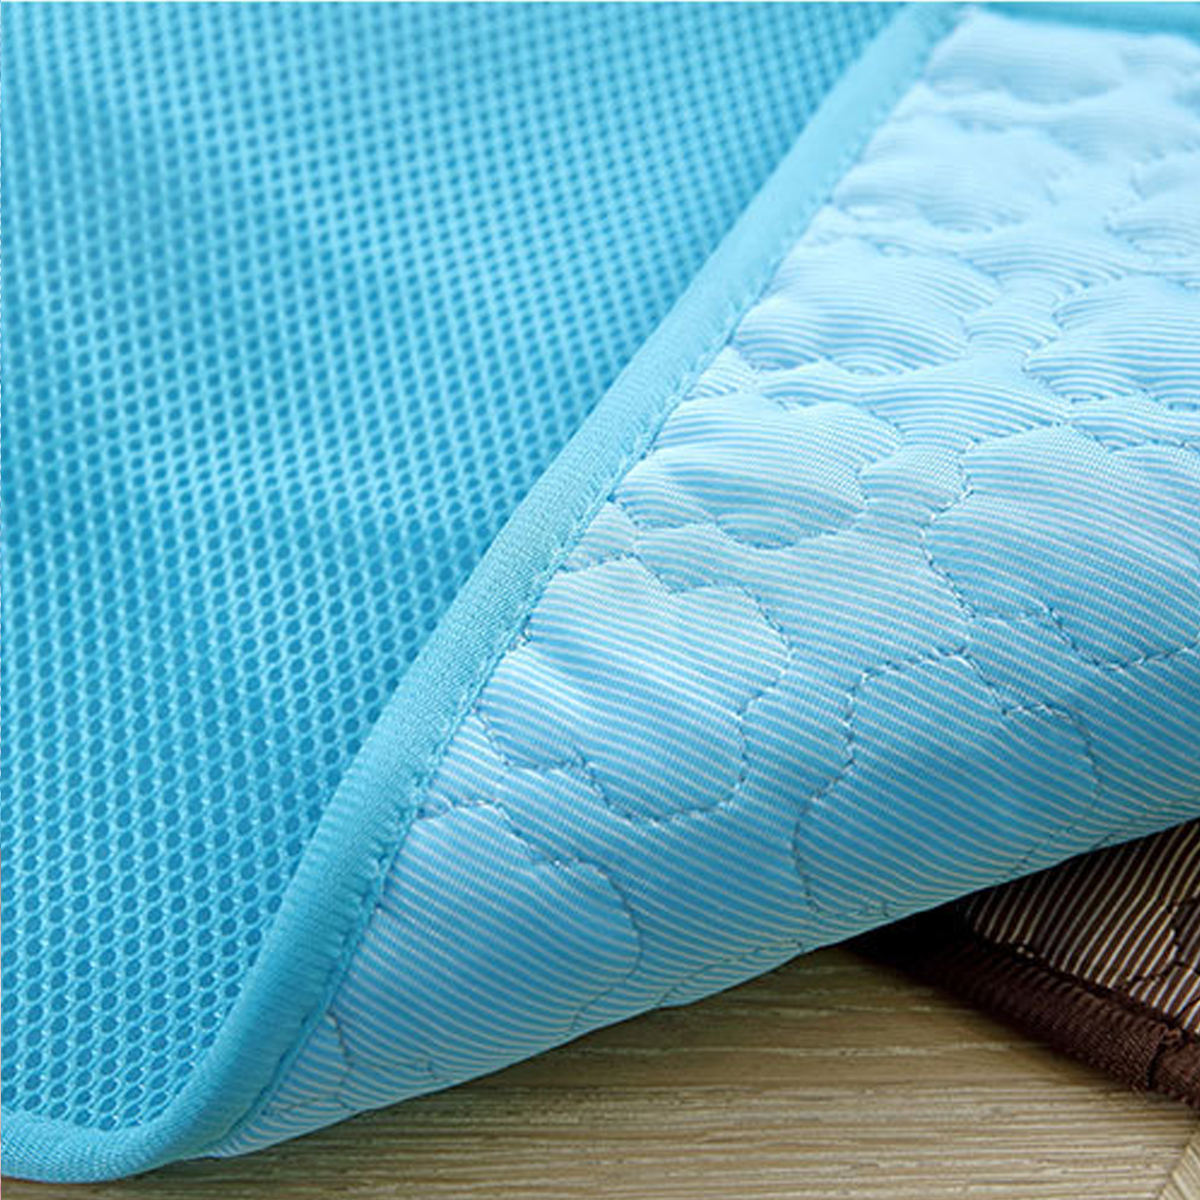 Pet-Cooling-Mat-Dog-Cat-Summer-Cooling-Cushion-Pads-Breathable-Comfortable-Dog-Supplies-1889099-6